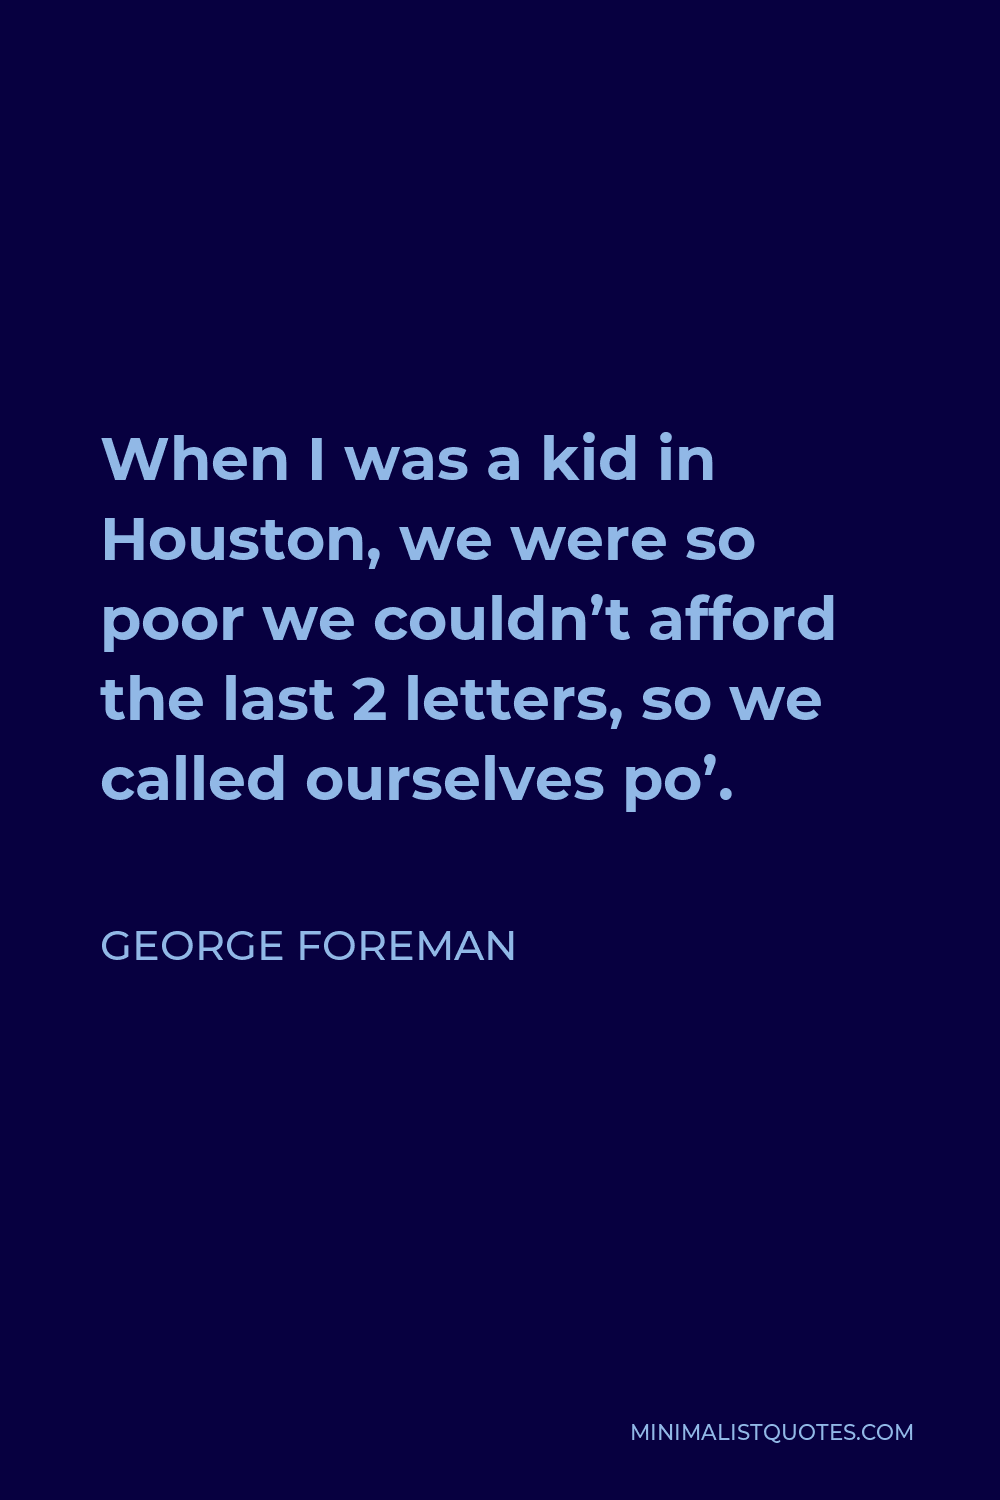 George Foreman Quote - When I was a kid in Houston, we were so poor we couldn’t afford the last 2 letters, so we called ourselves po’.